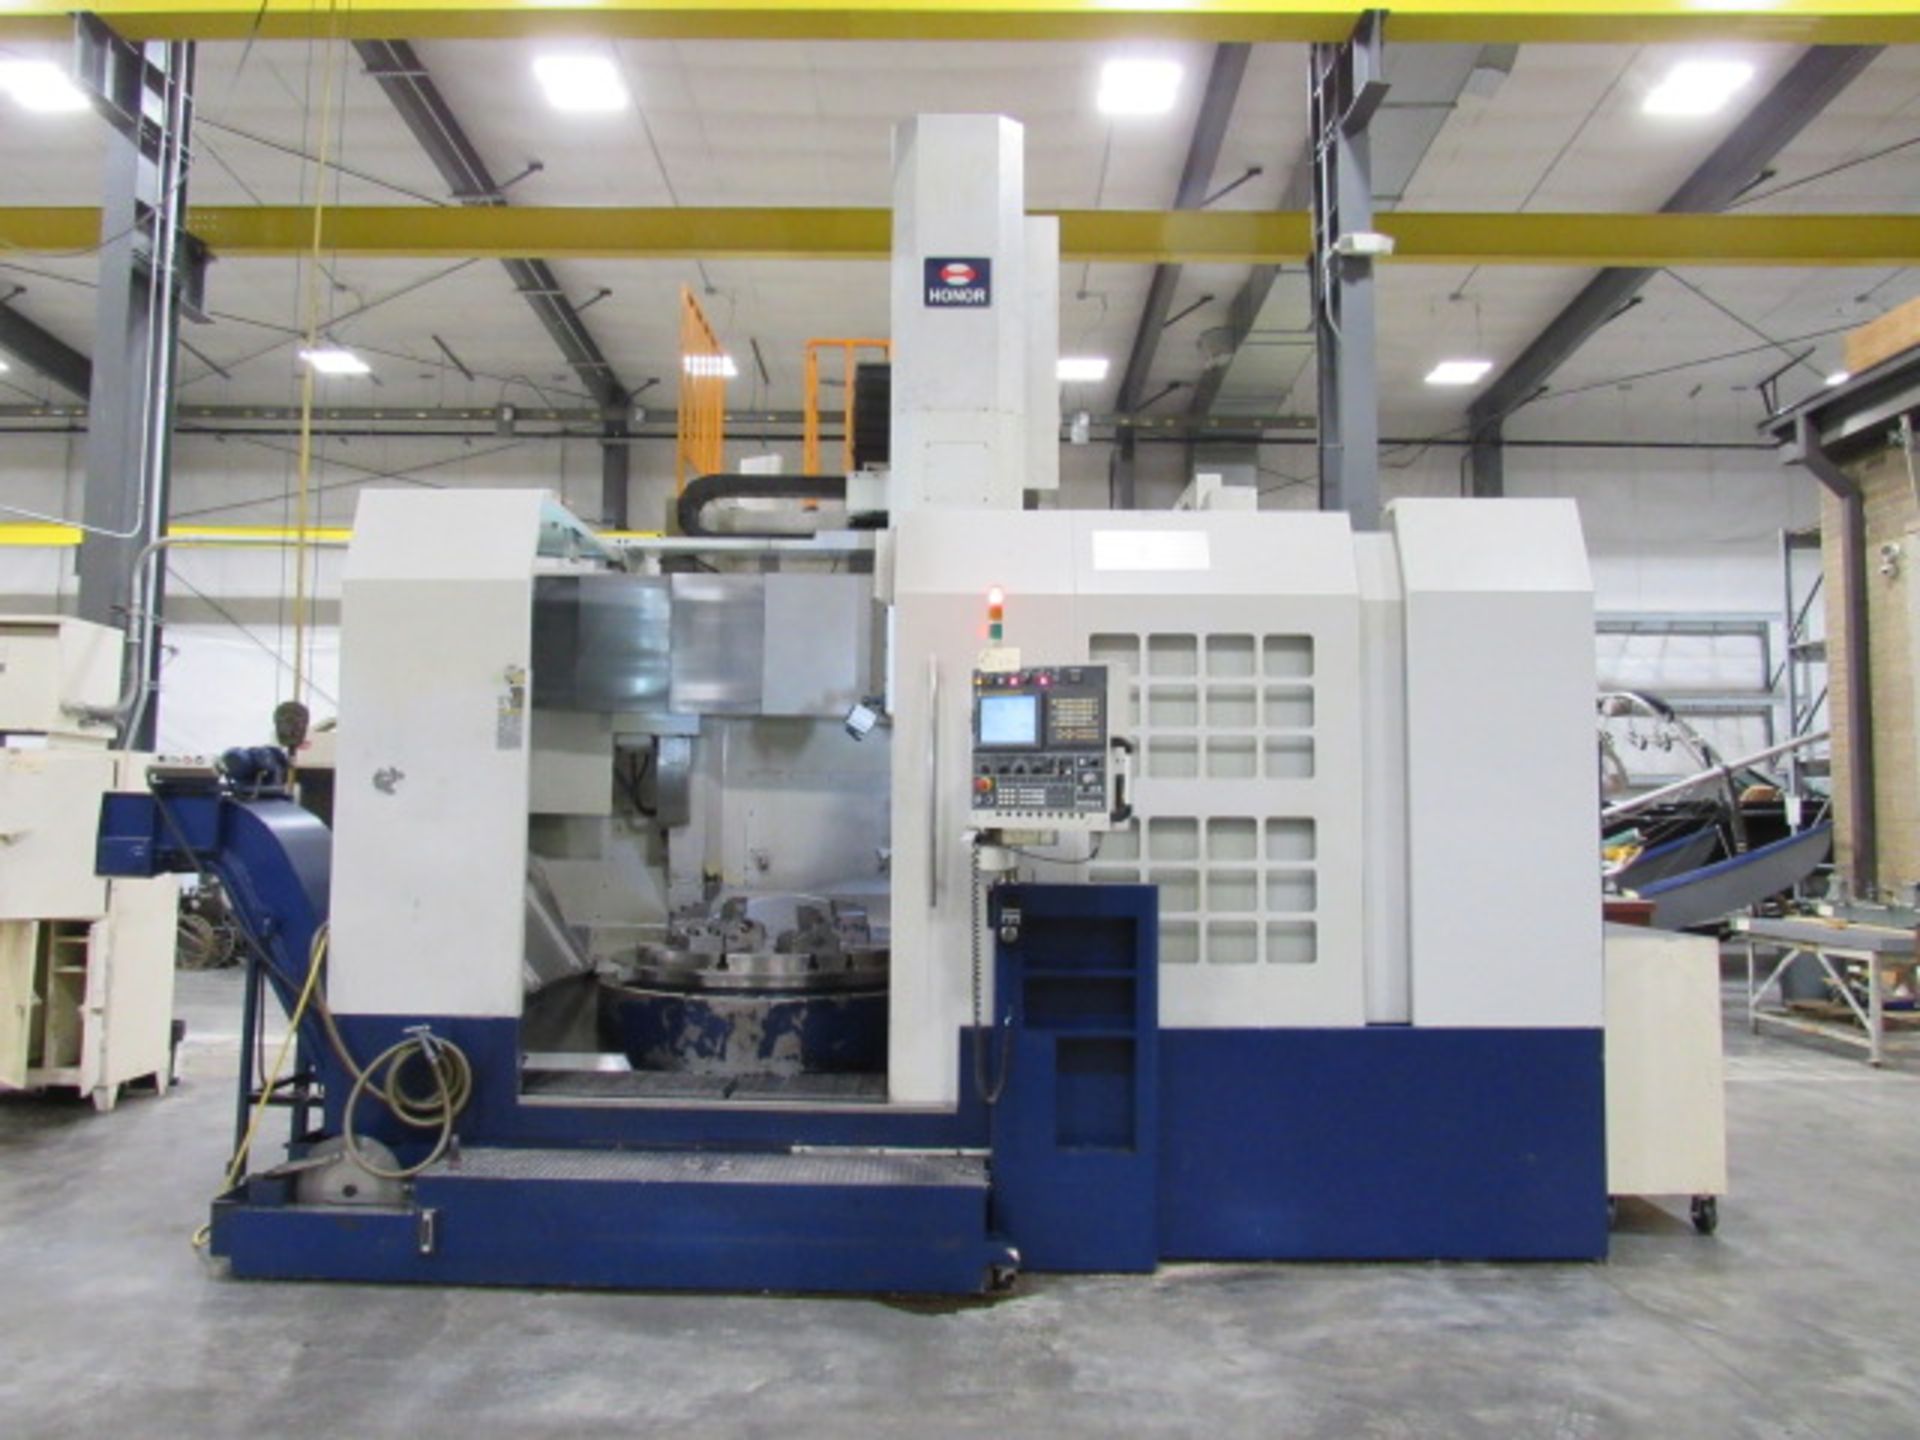 Honor Seiki VL-125CM CNC Vertical Turning Lathe with Live Milling